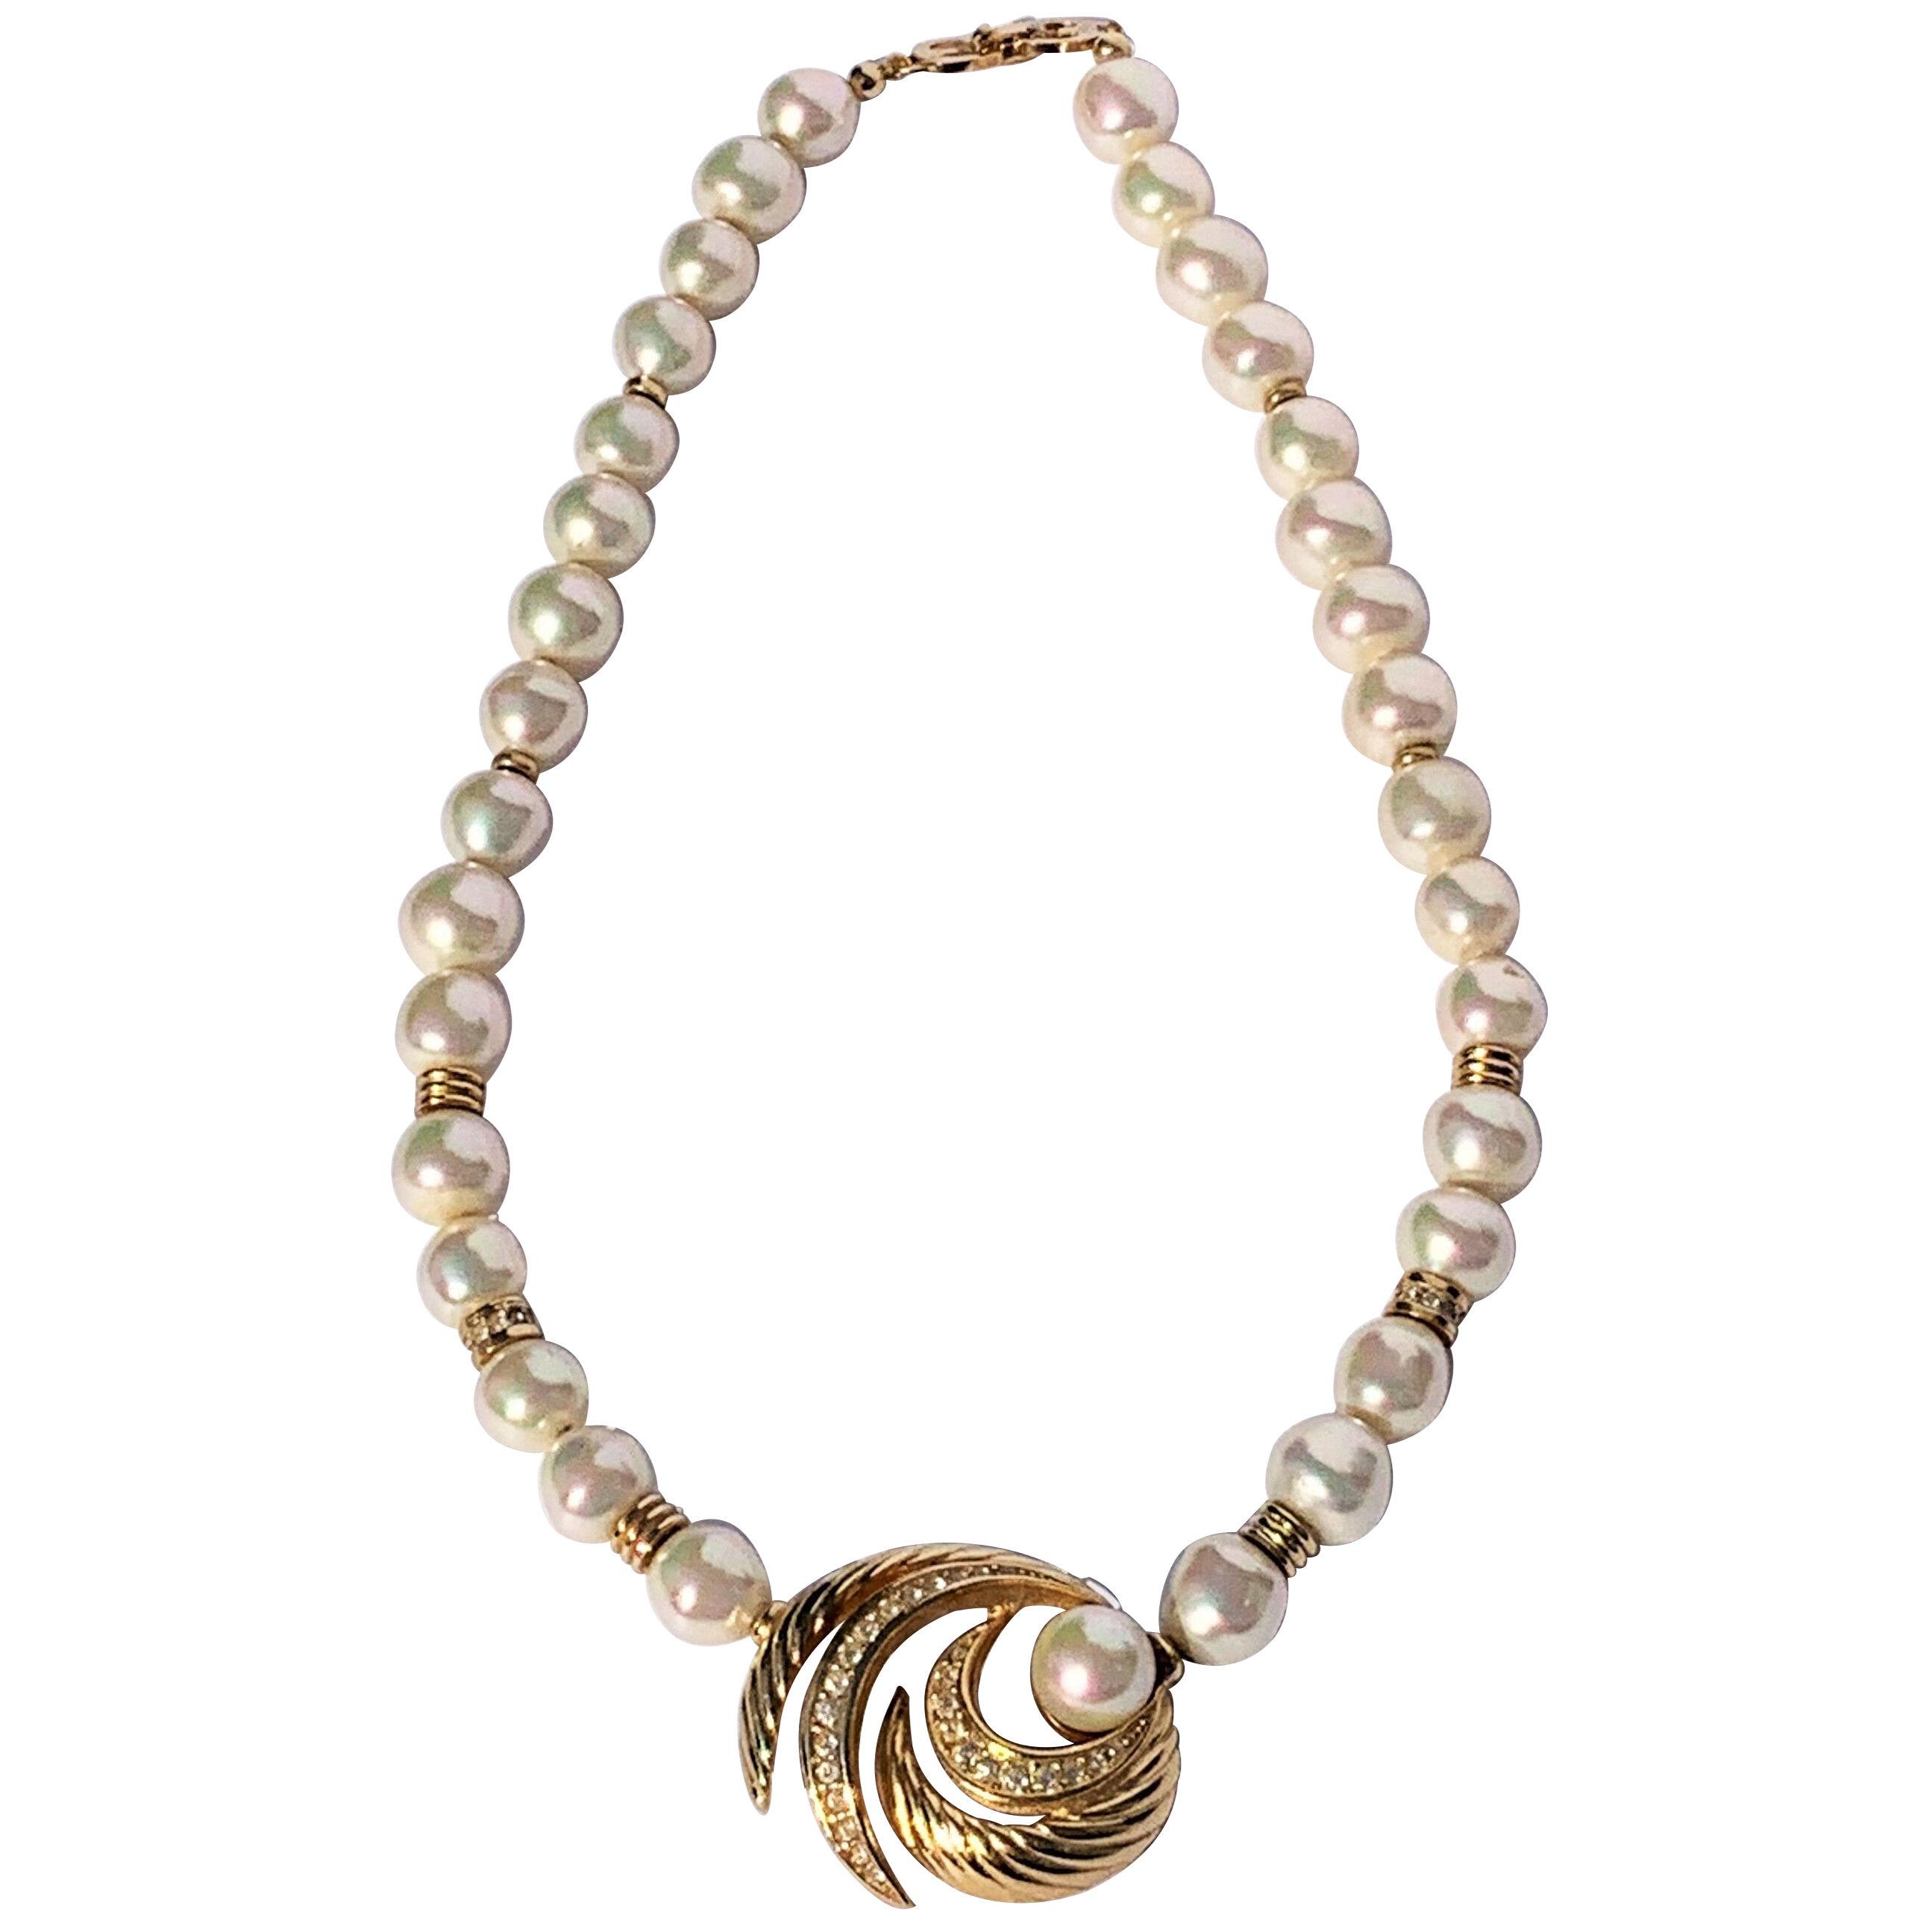 Grosse for Christian Dior Swirl Necklace